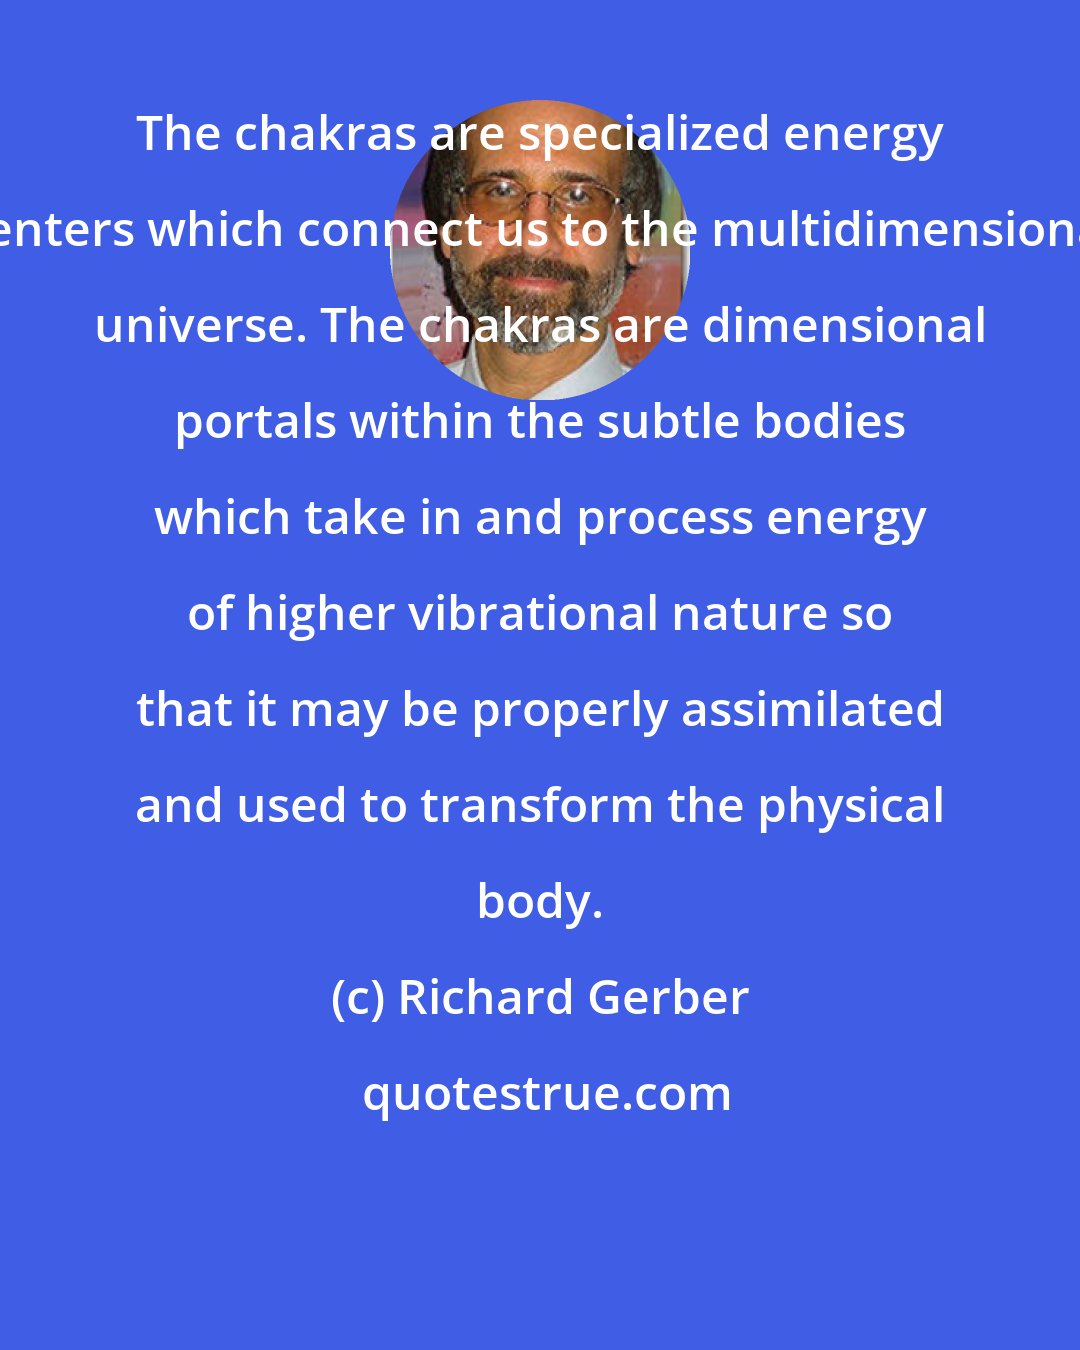 Richard Gerber: The chakras are specialized energy centers which connect us to the multidimensional universe. The chakras are dimensional portals within the subtle bodies which take in and process energy of higher vibrational nature so that it may be properly assimilated and used to transform the physical body.